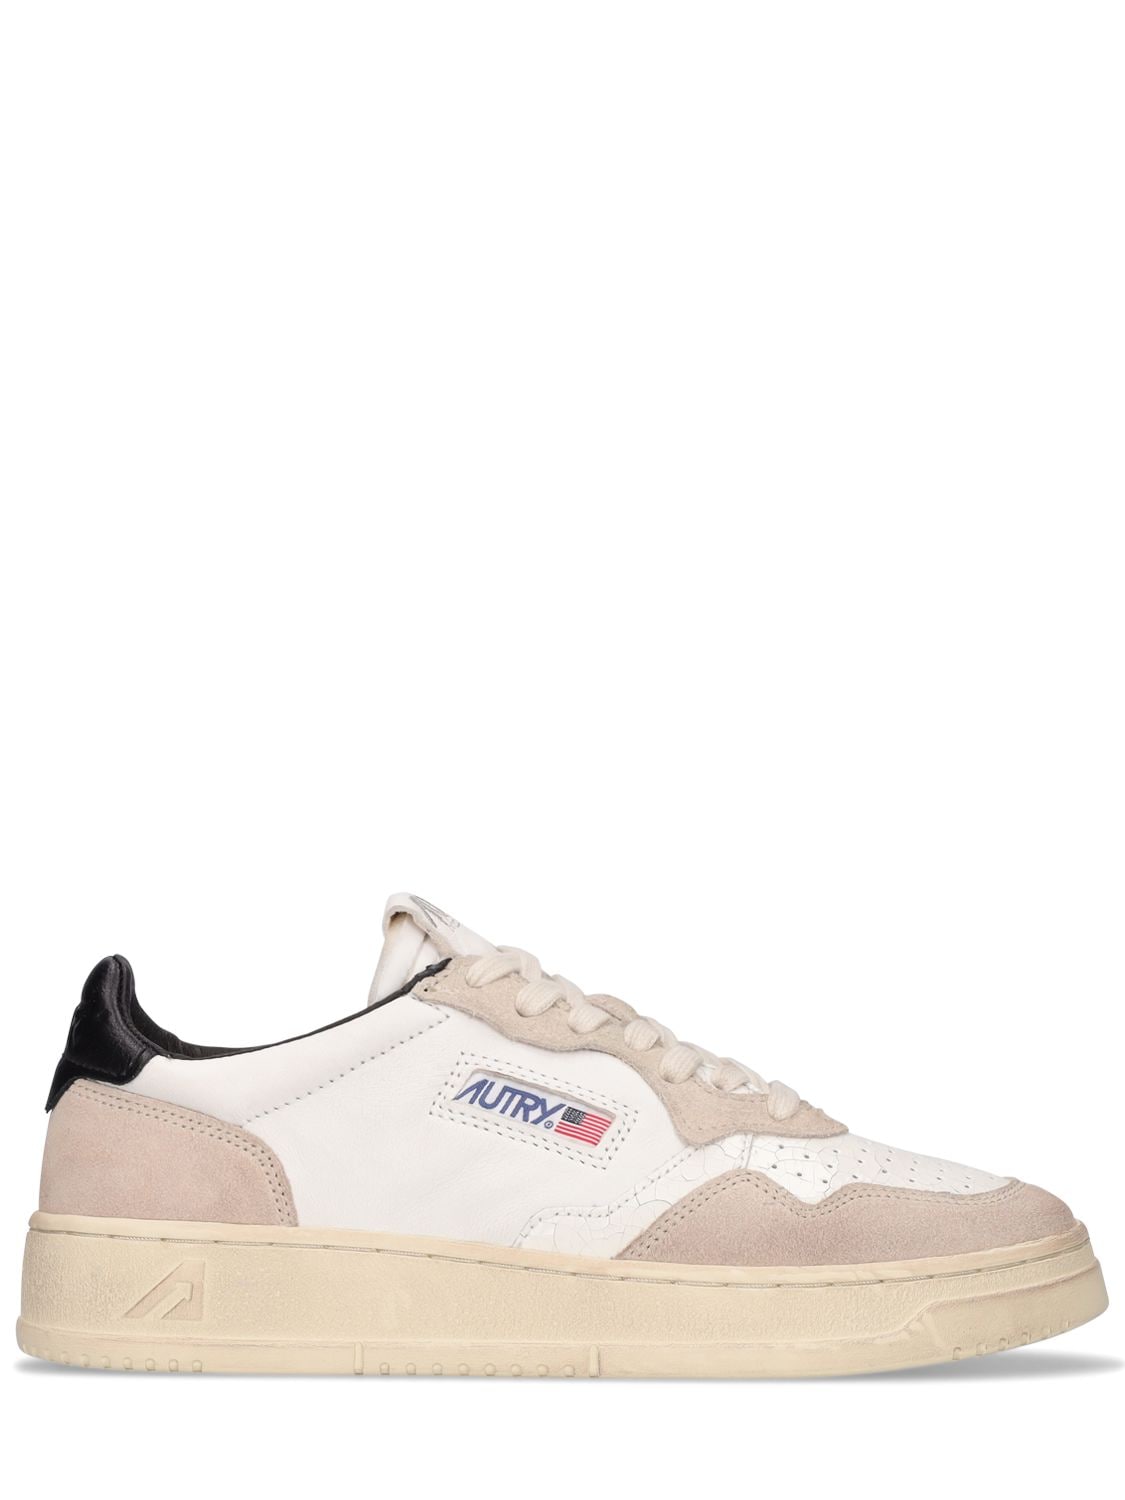 Autry 35mm Medalist Low Sneakers In White | ModeSens